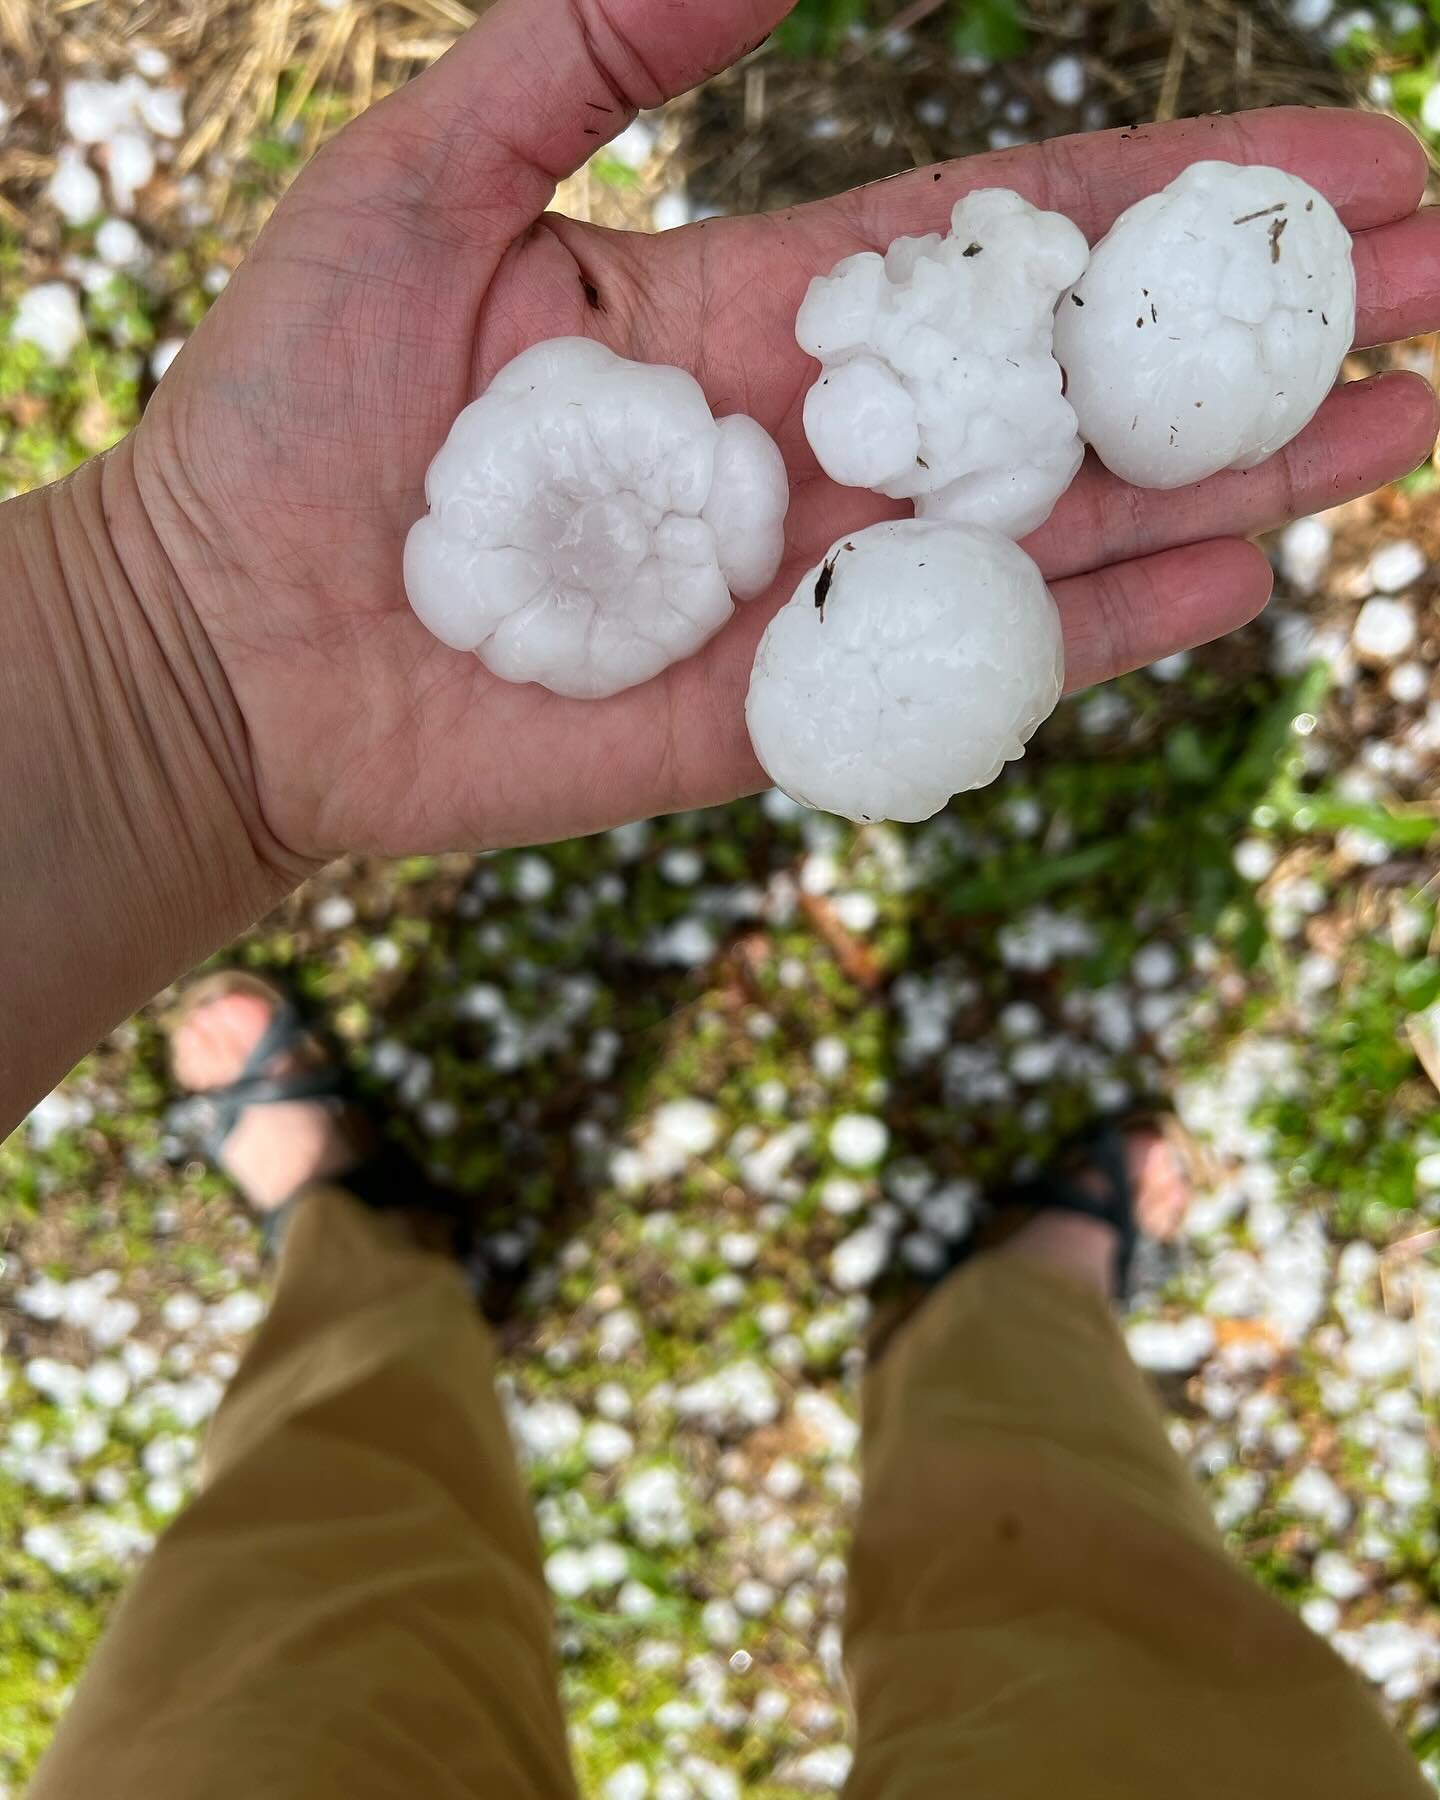 Another surprise hail storm today. Not as much damage as last year, but still 😳 !!! We are in a tornado watch until 10pm. Keeping our fingers crossed 🤞. 

#hailstorm #midwestseverestorm #iowa #thunderstorm  #largehail